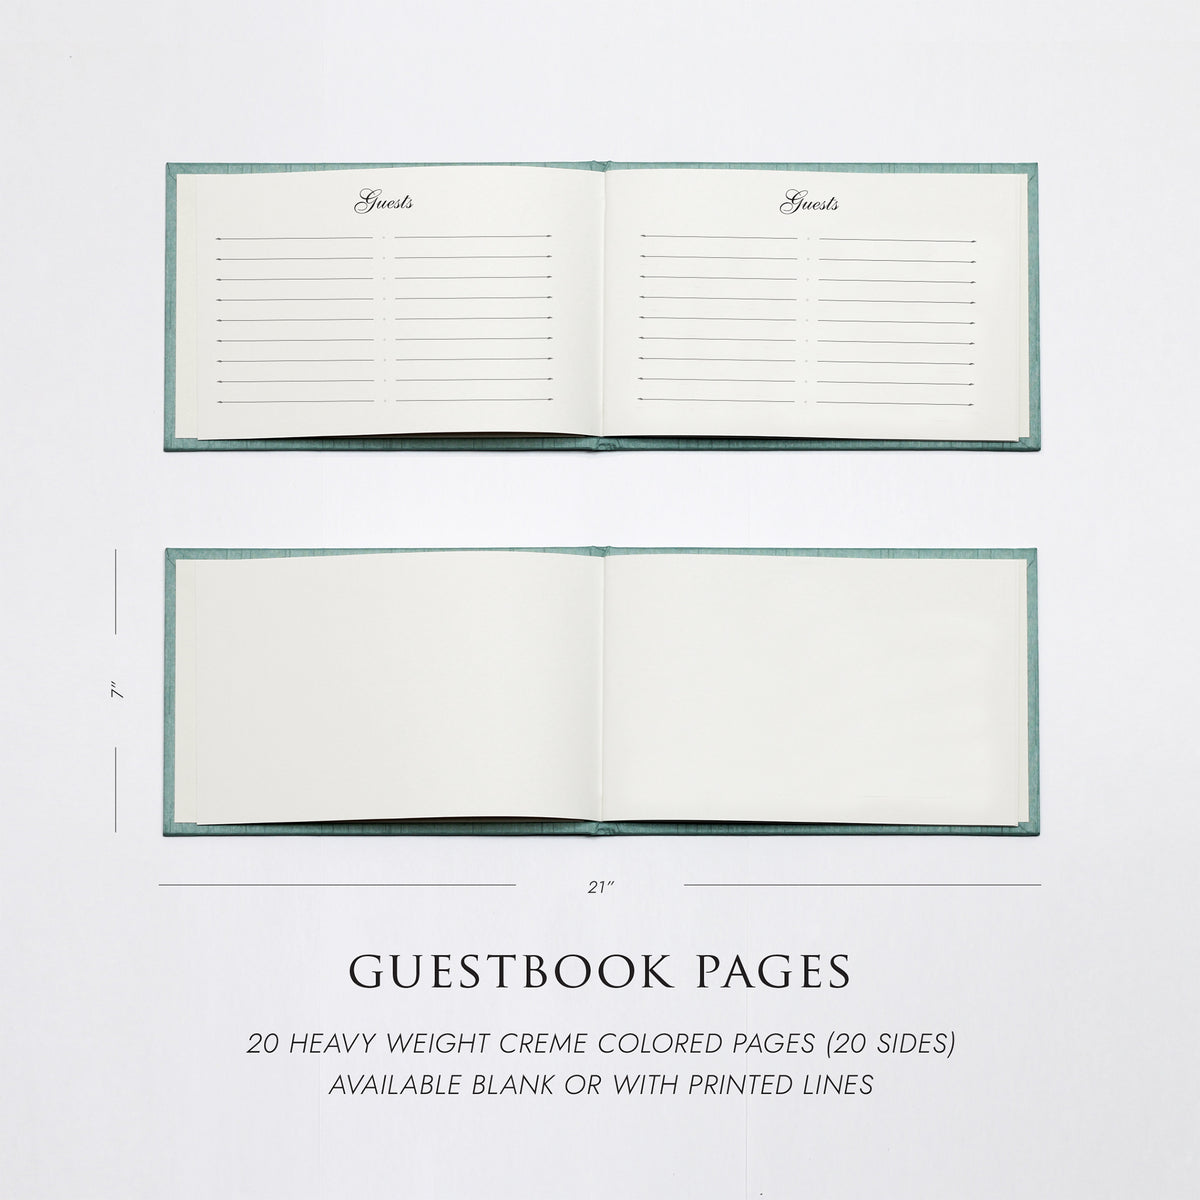 Guestbook Embossed with “Guests” with Dove Gray Cotton Cover